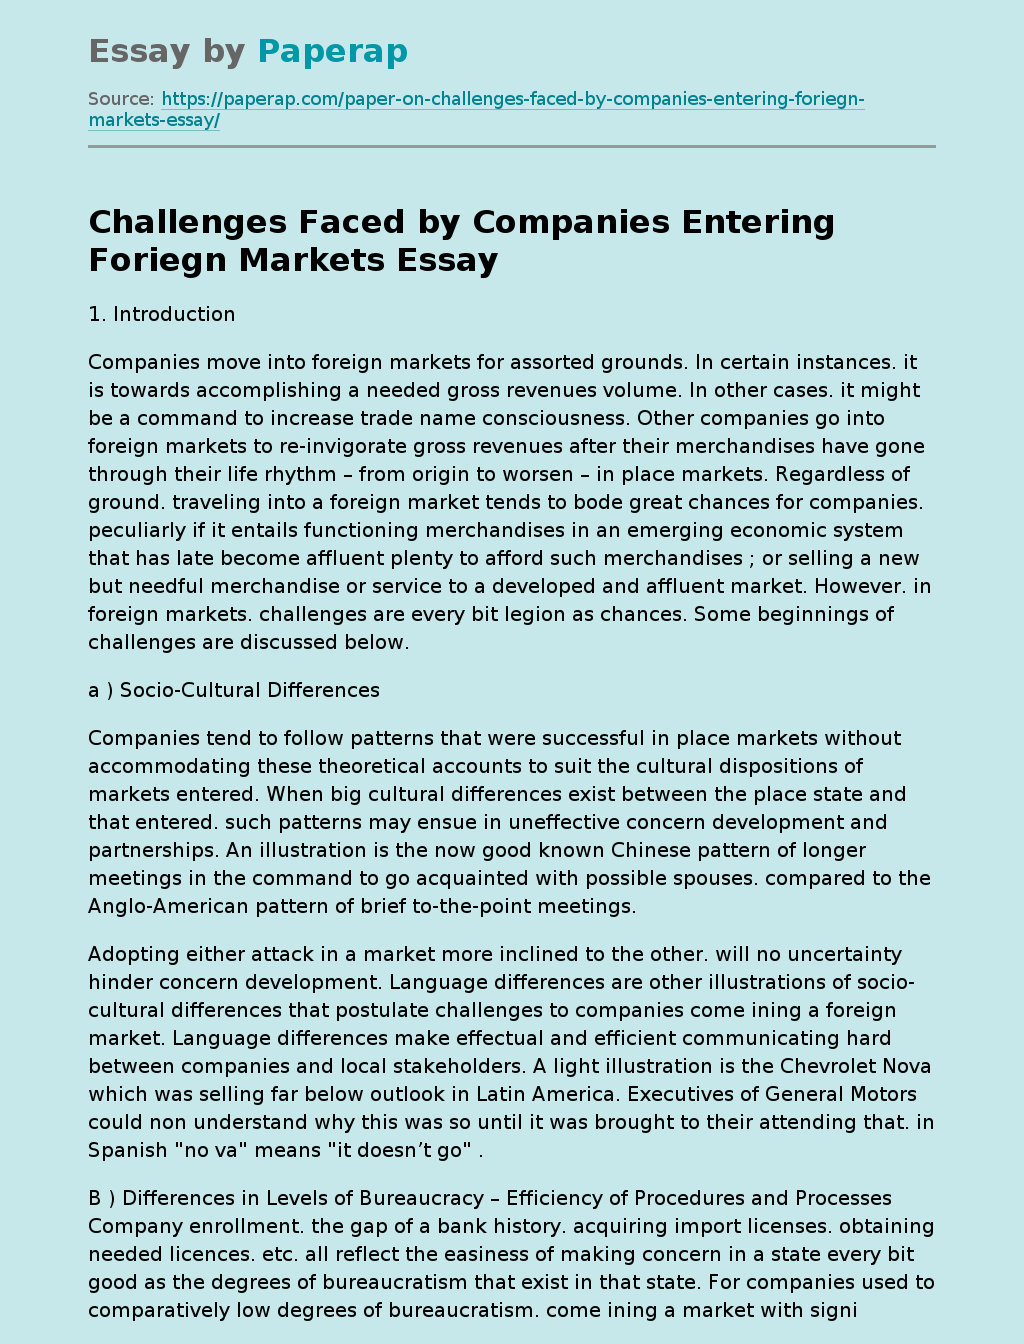 Challenges Faced by Companies Entering Foriegn Markets